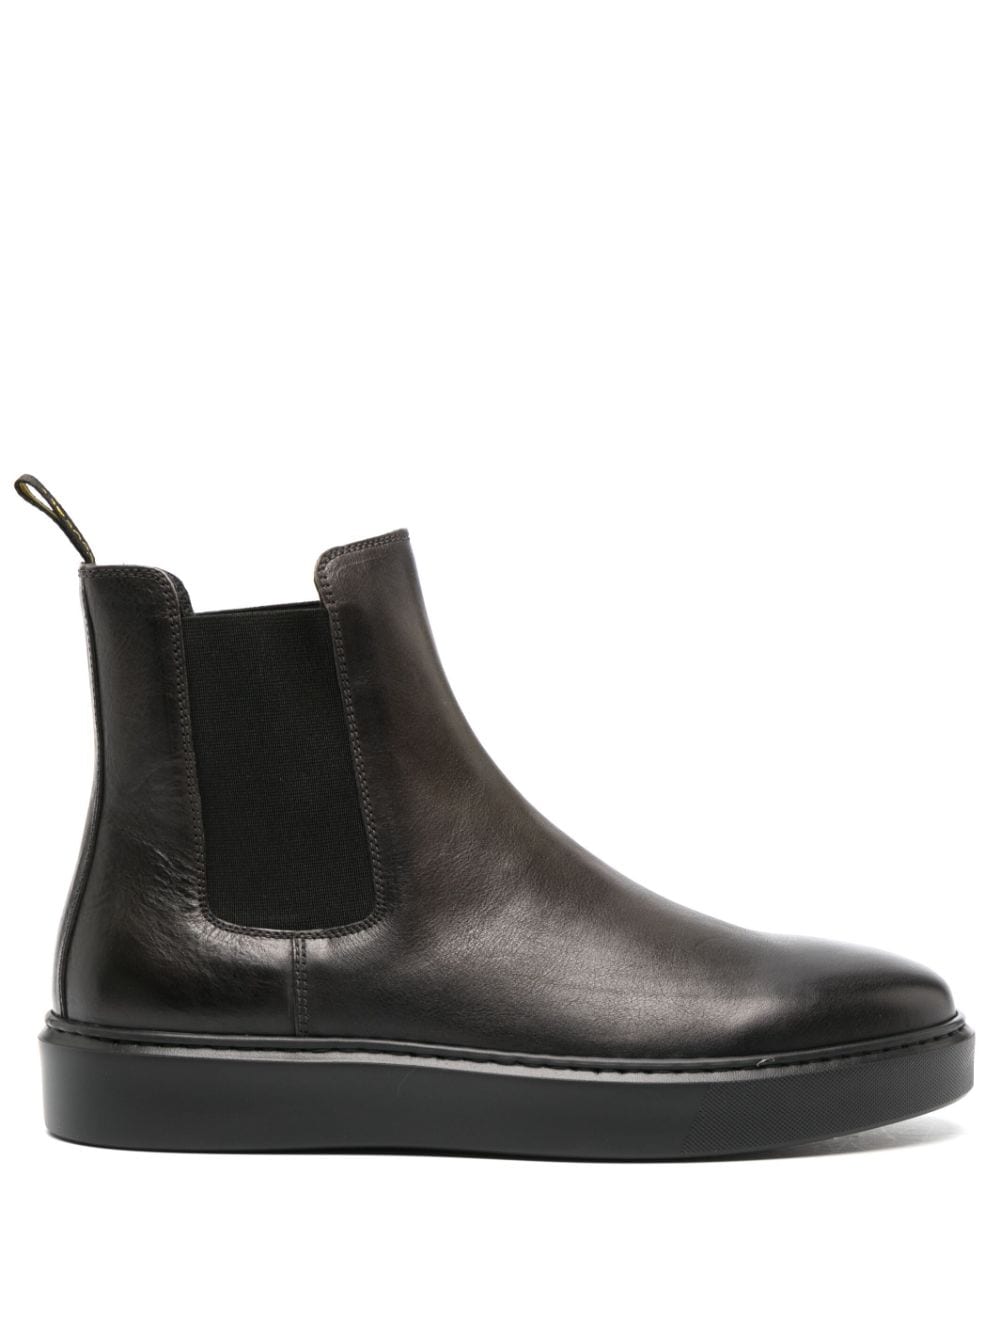 Doucal's leather Chelsea ankle boots - Grey von Doucal's